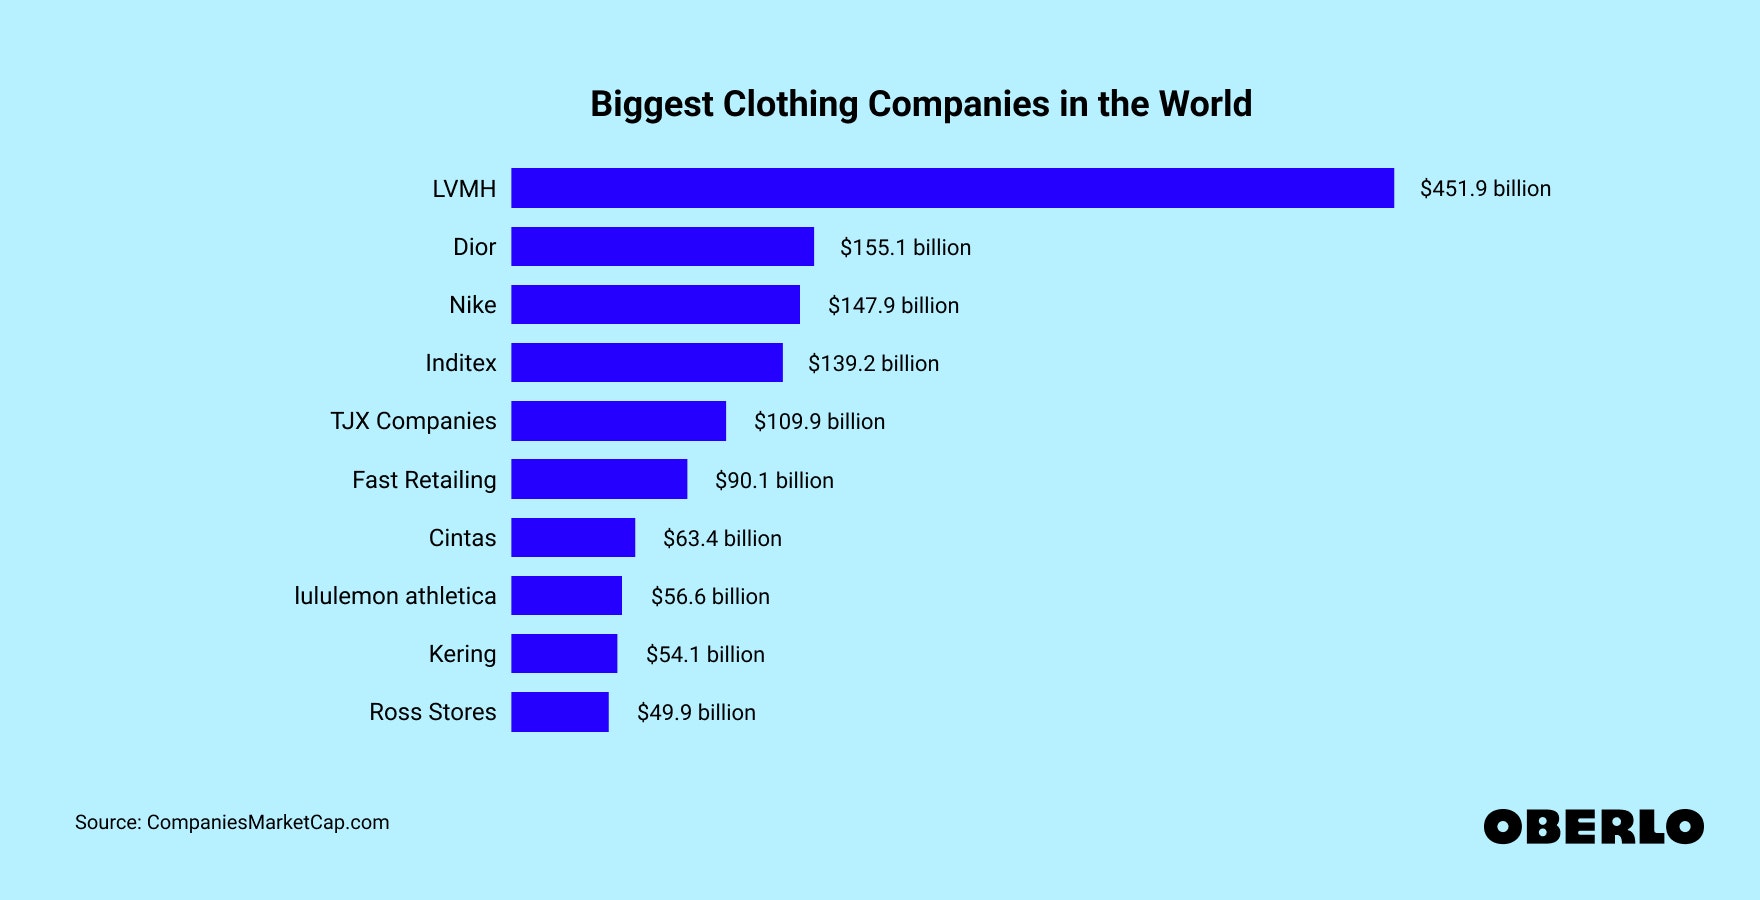 Chart showing the biggest clothing companies in the world ranked by market value